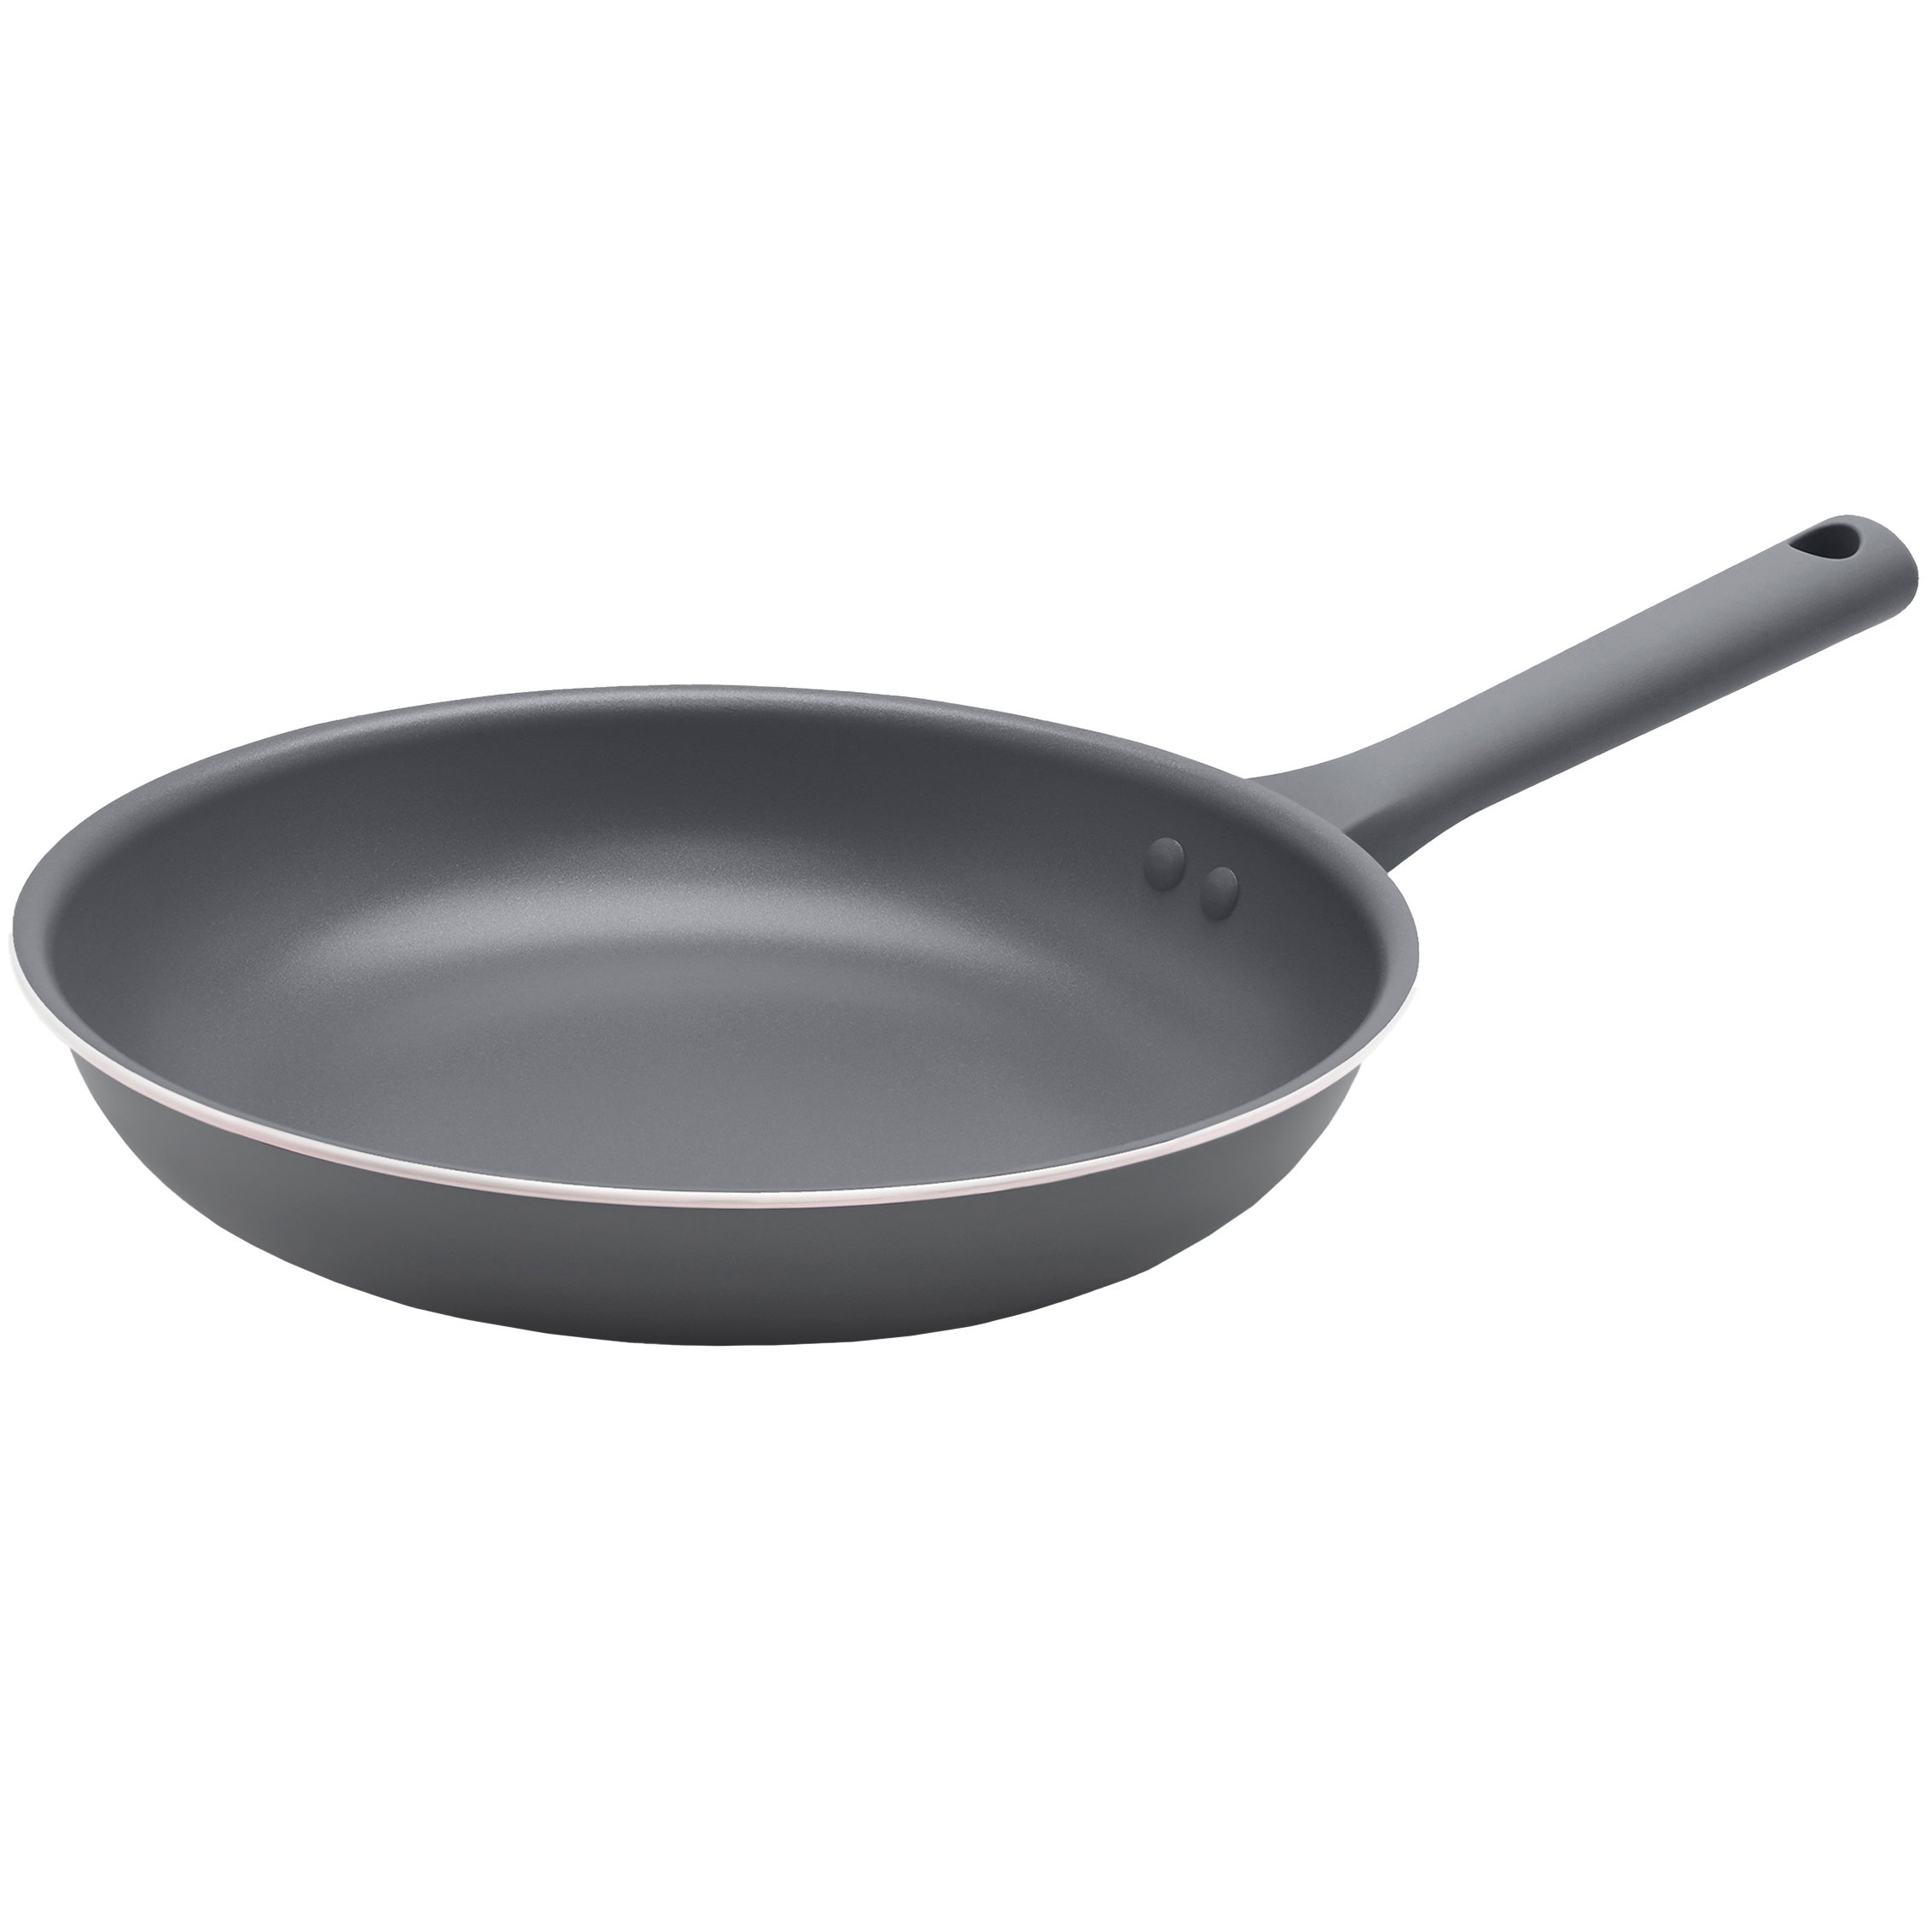 neef Split Intens our goods Non-Stick Fry Pan - Pebble Gray - Shop Kitchen & Dining at H-E-B